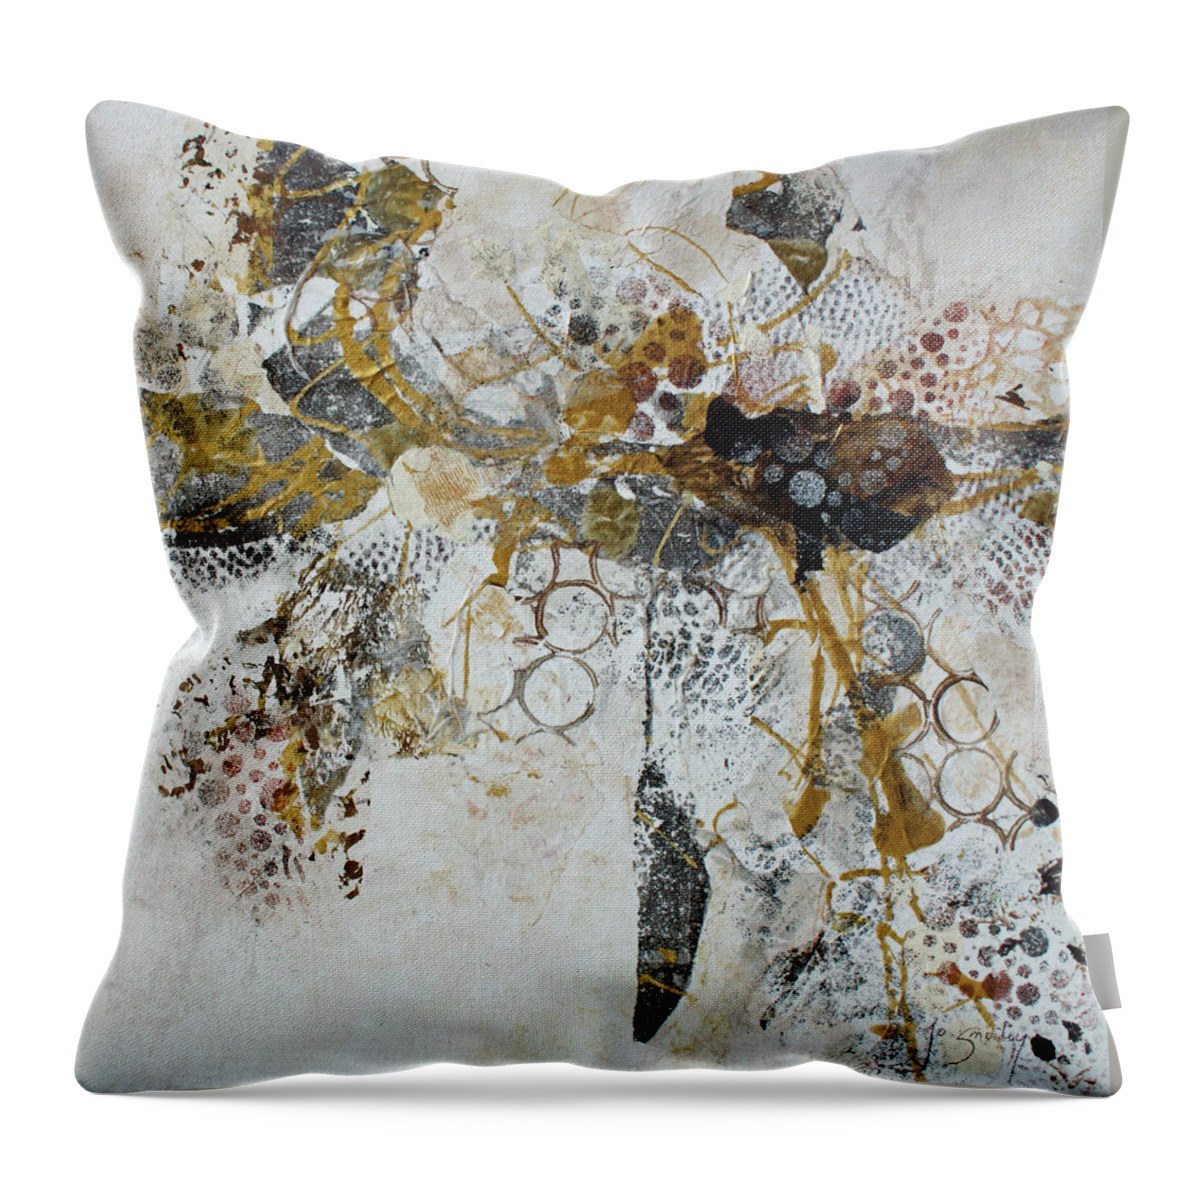 Abstract Art. Prints Throw Pillow featuring the painting Diversity by Jo Smoley